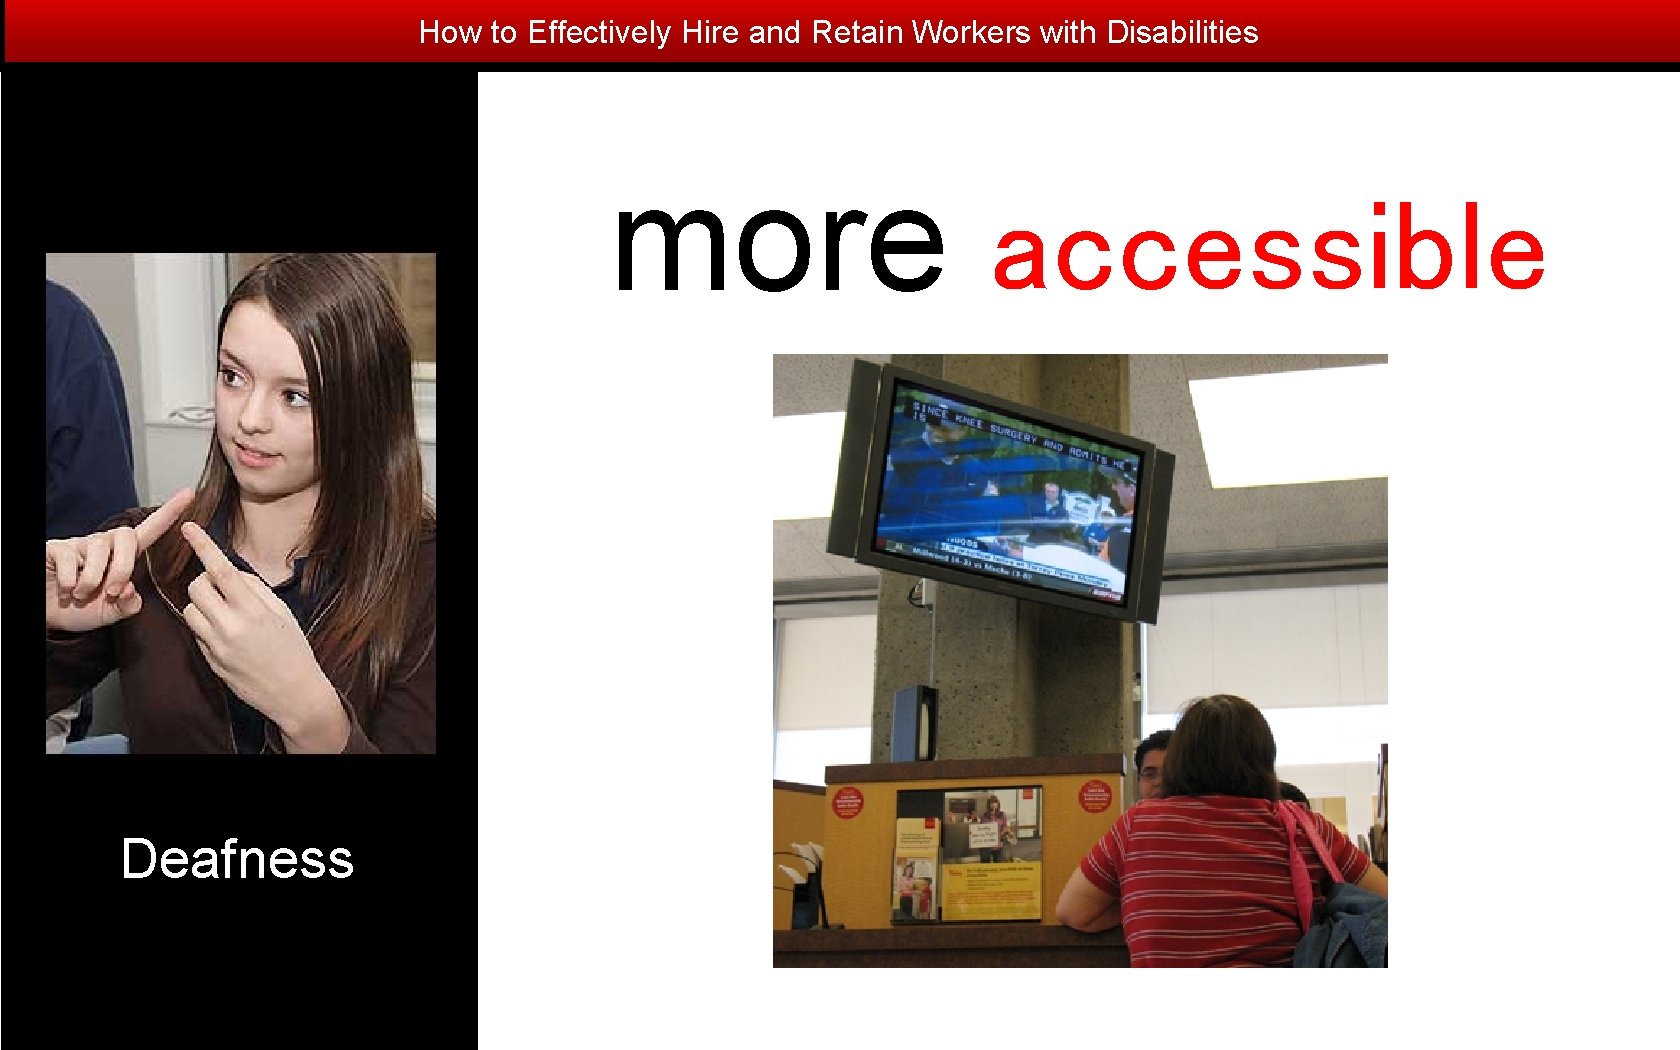 How to Effectively Hire and Retain Workers with Disabilities more accessible Deafness 